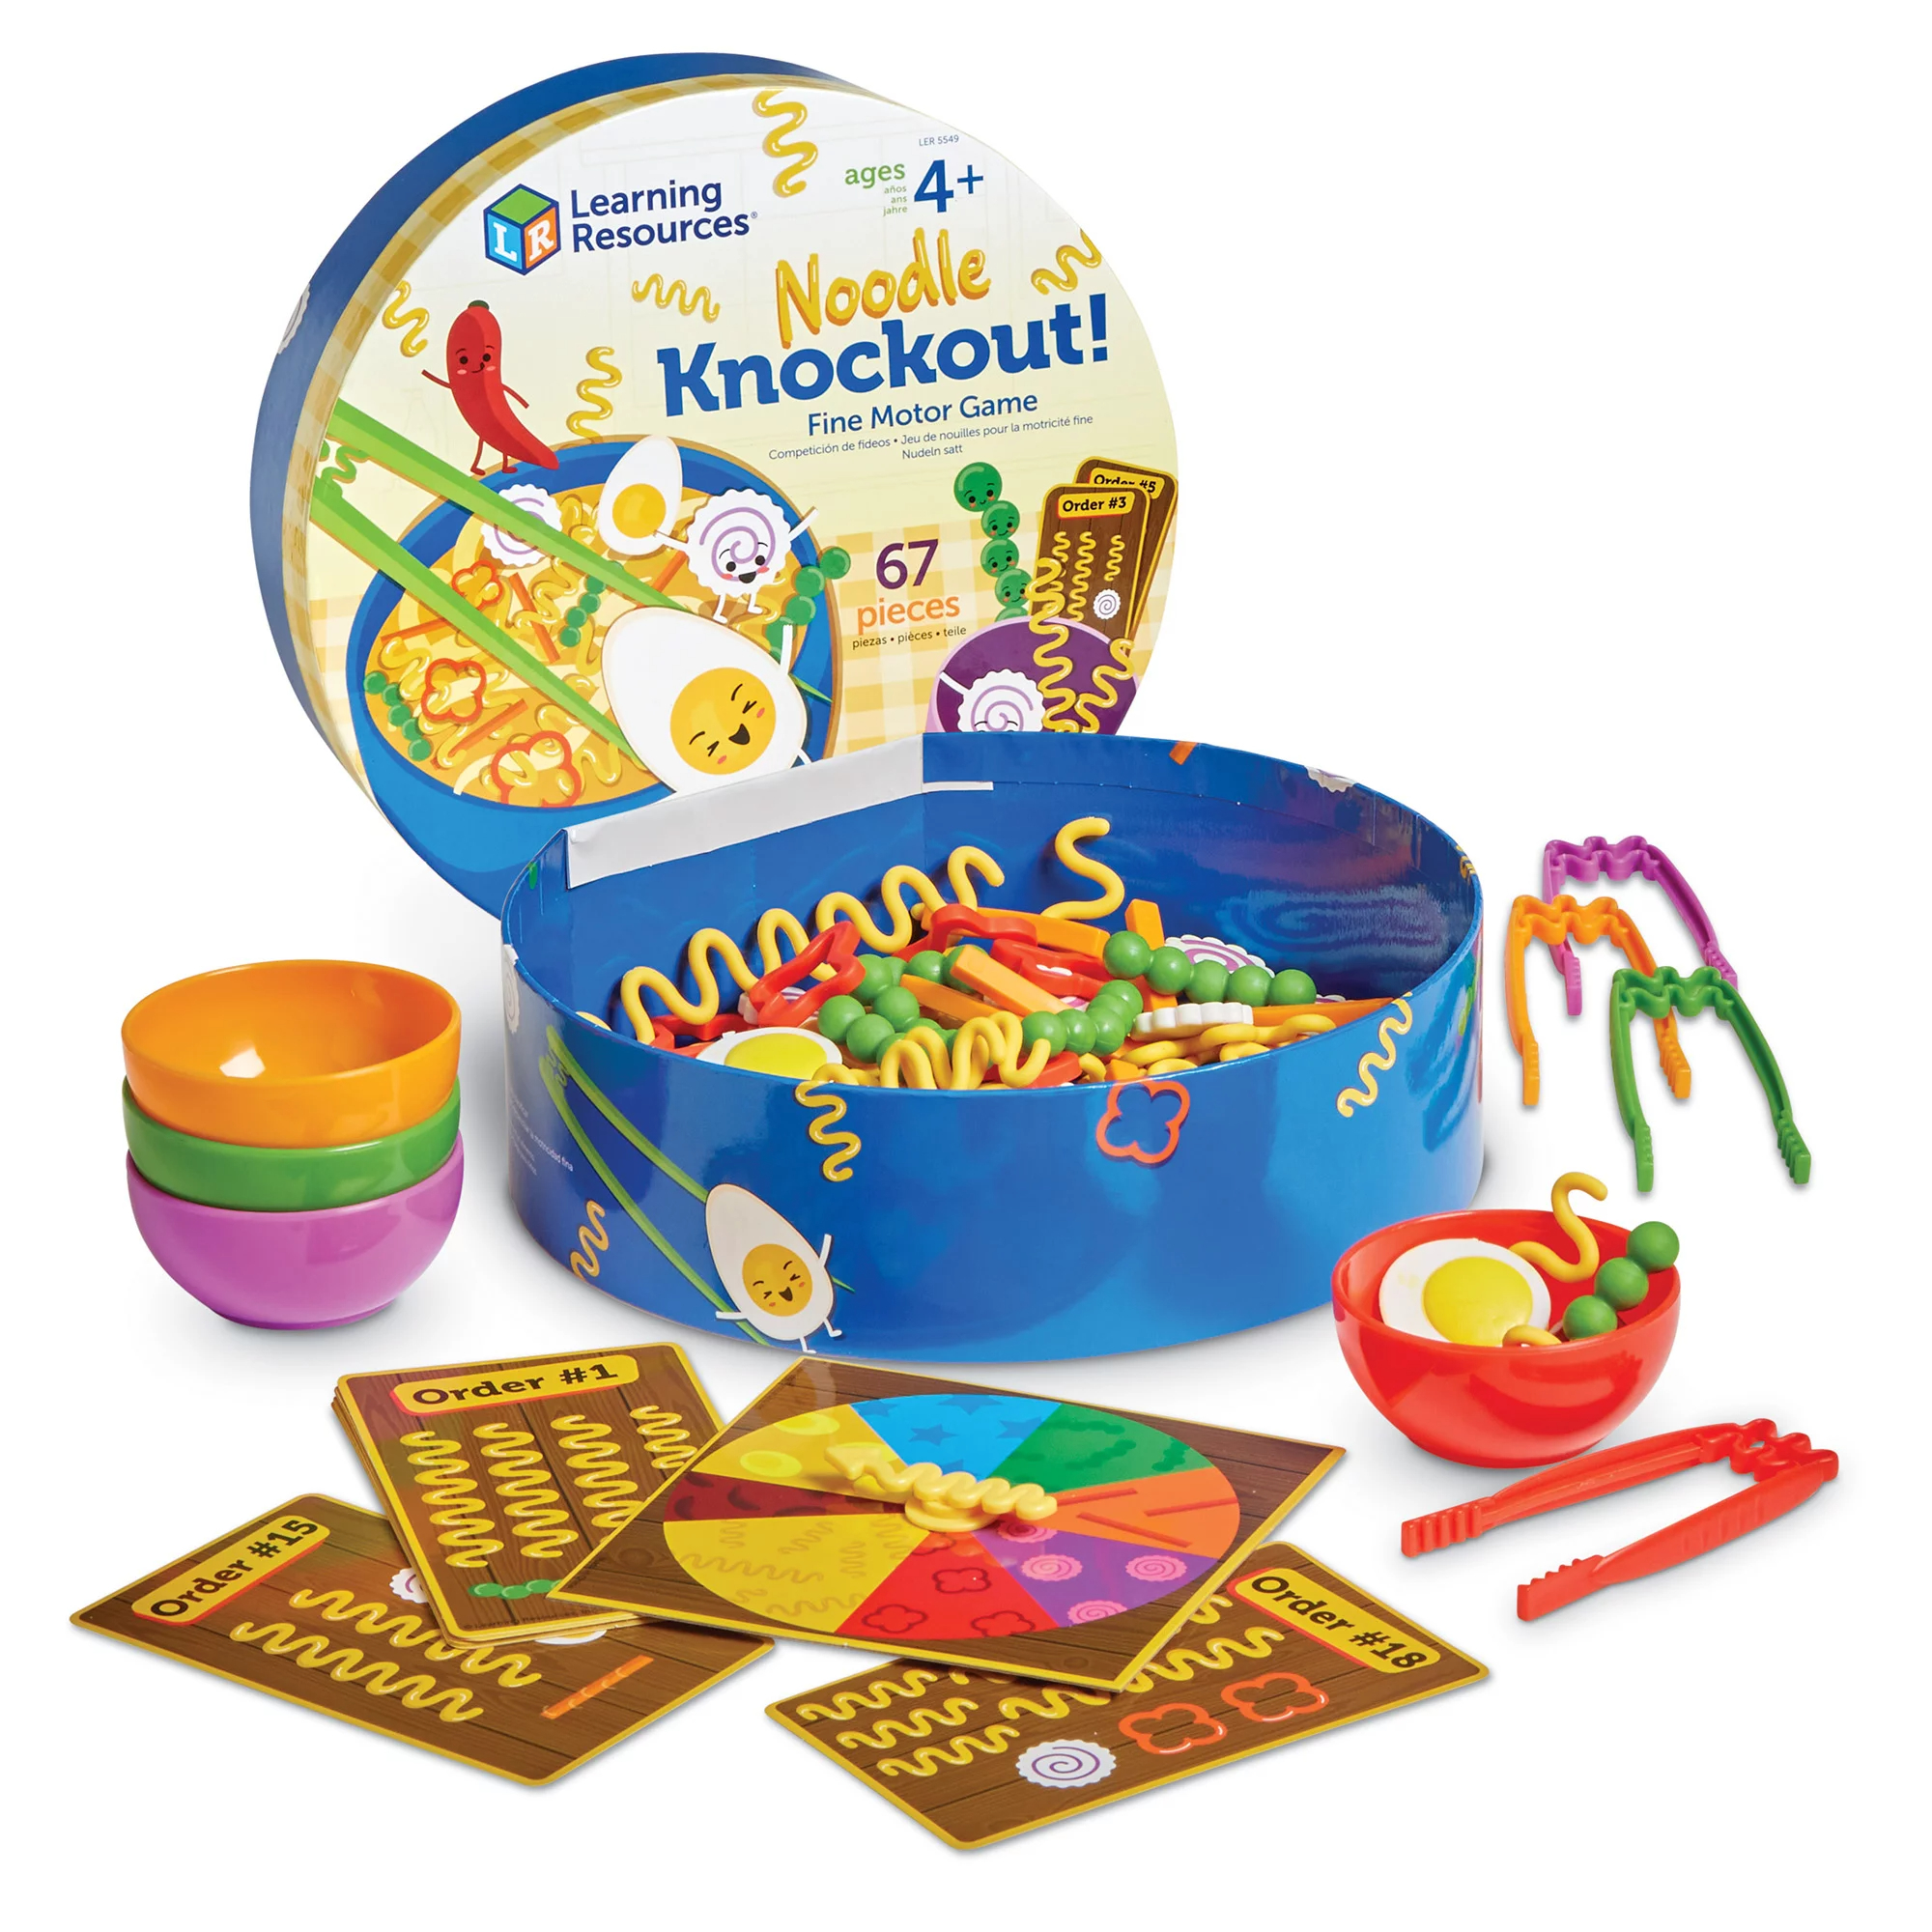 Colorful noodle knockout game with all of its parts and packaging